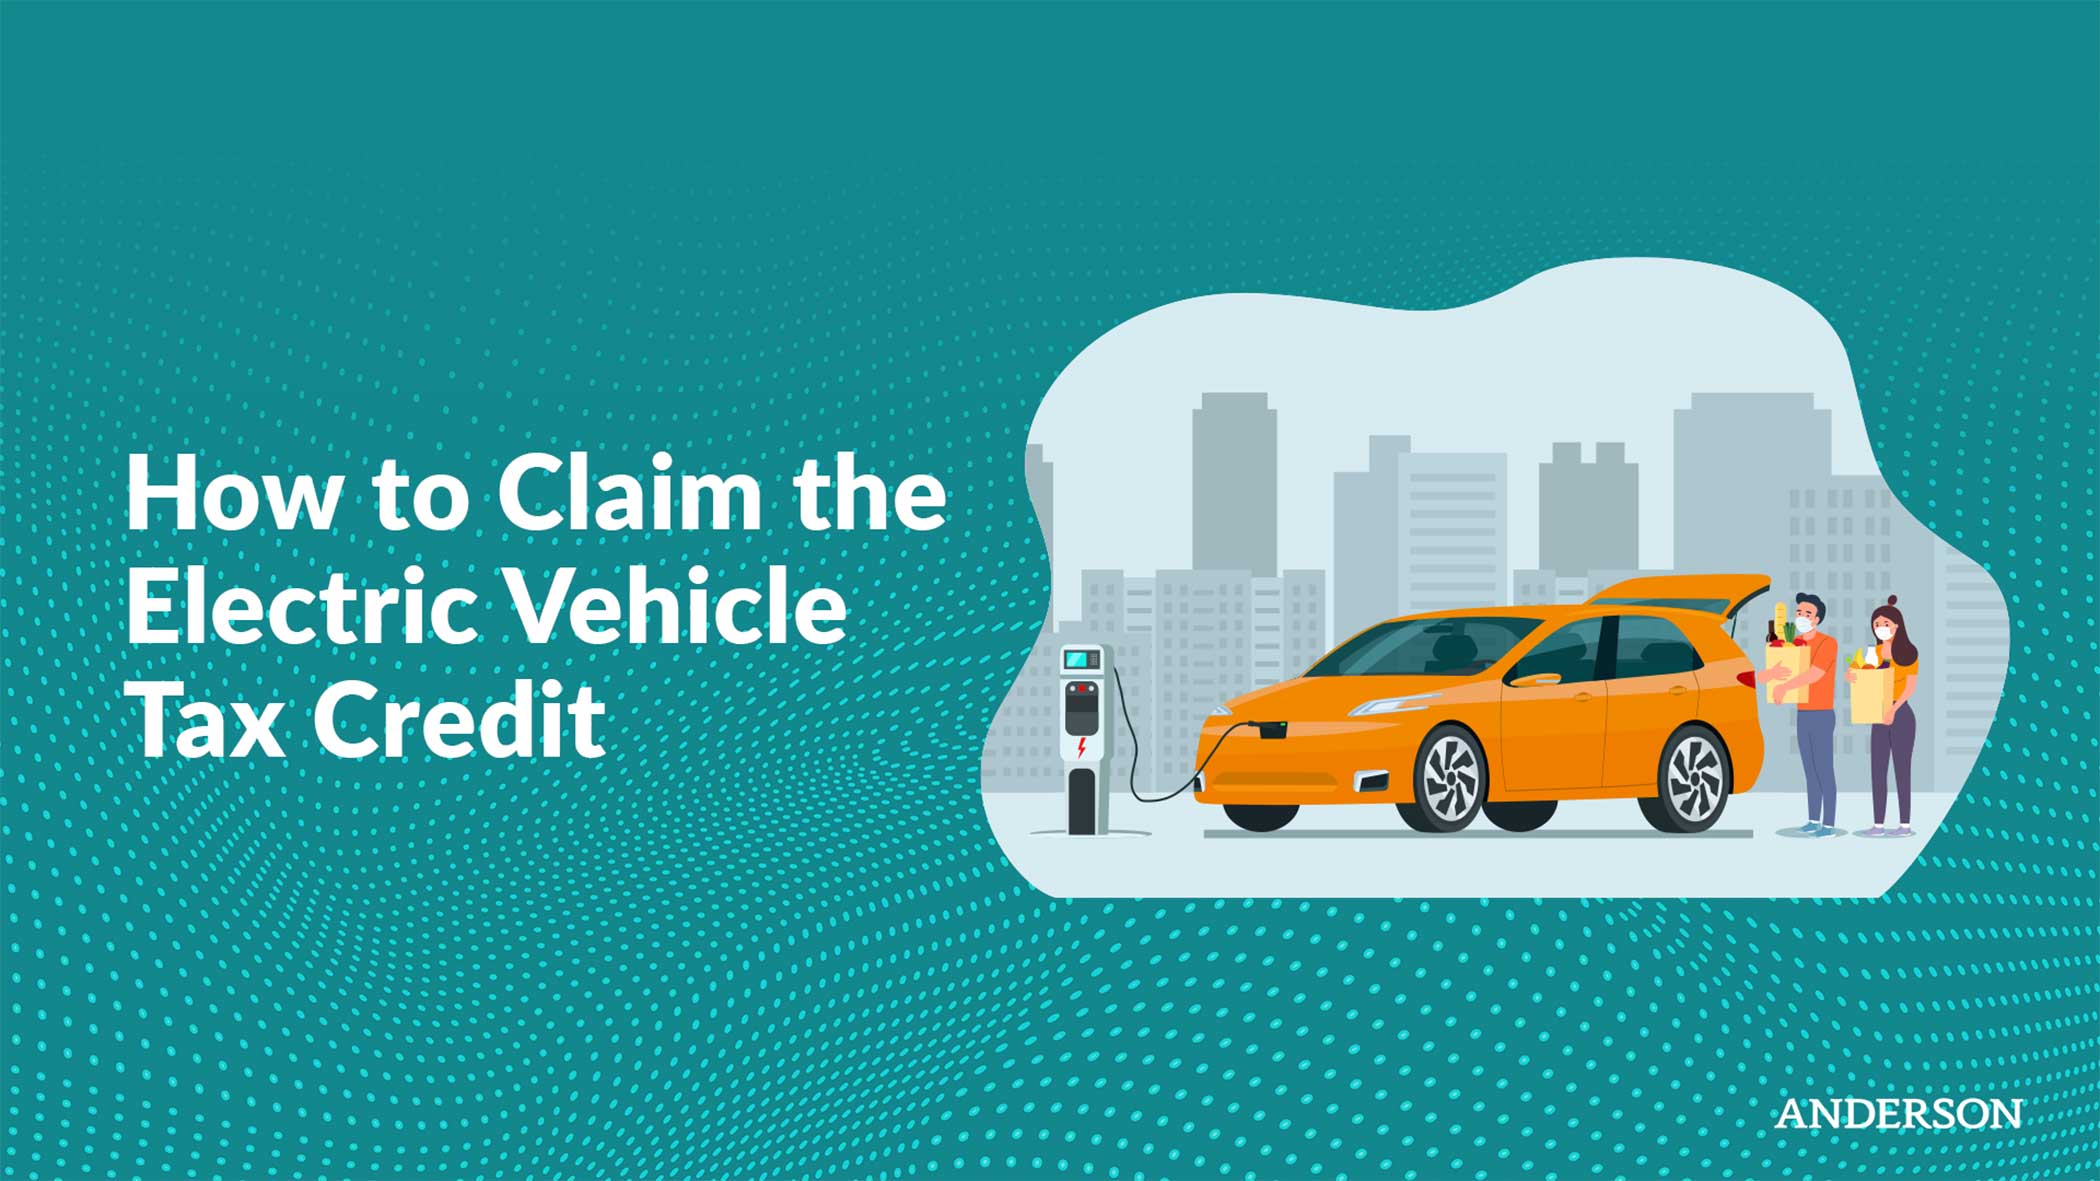 Learn the steps to Claim Your Electric Vehicle Tax Credit